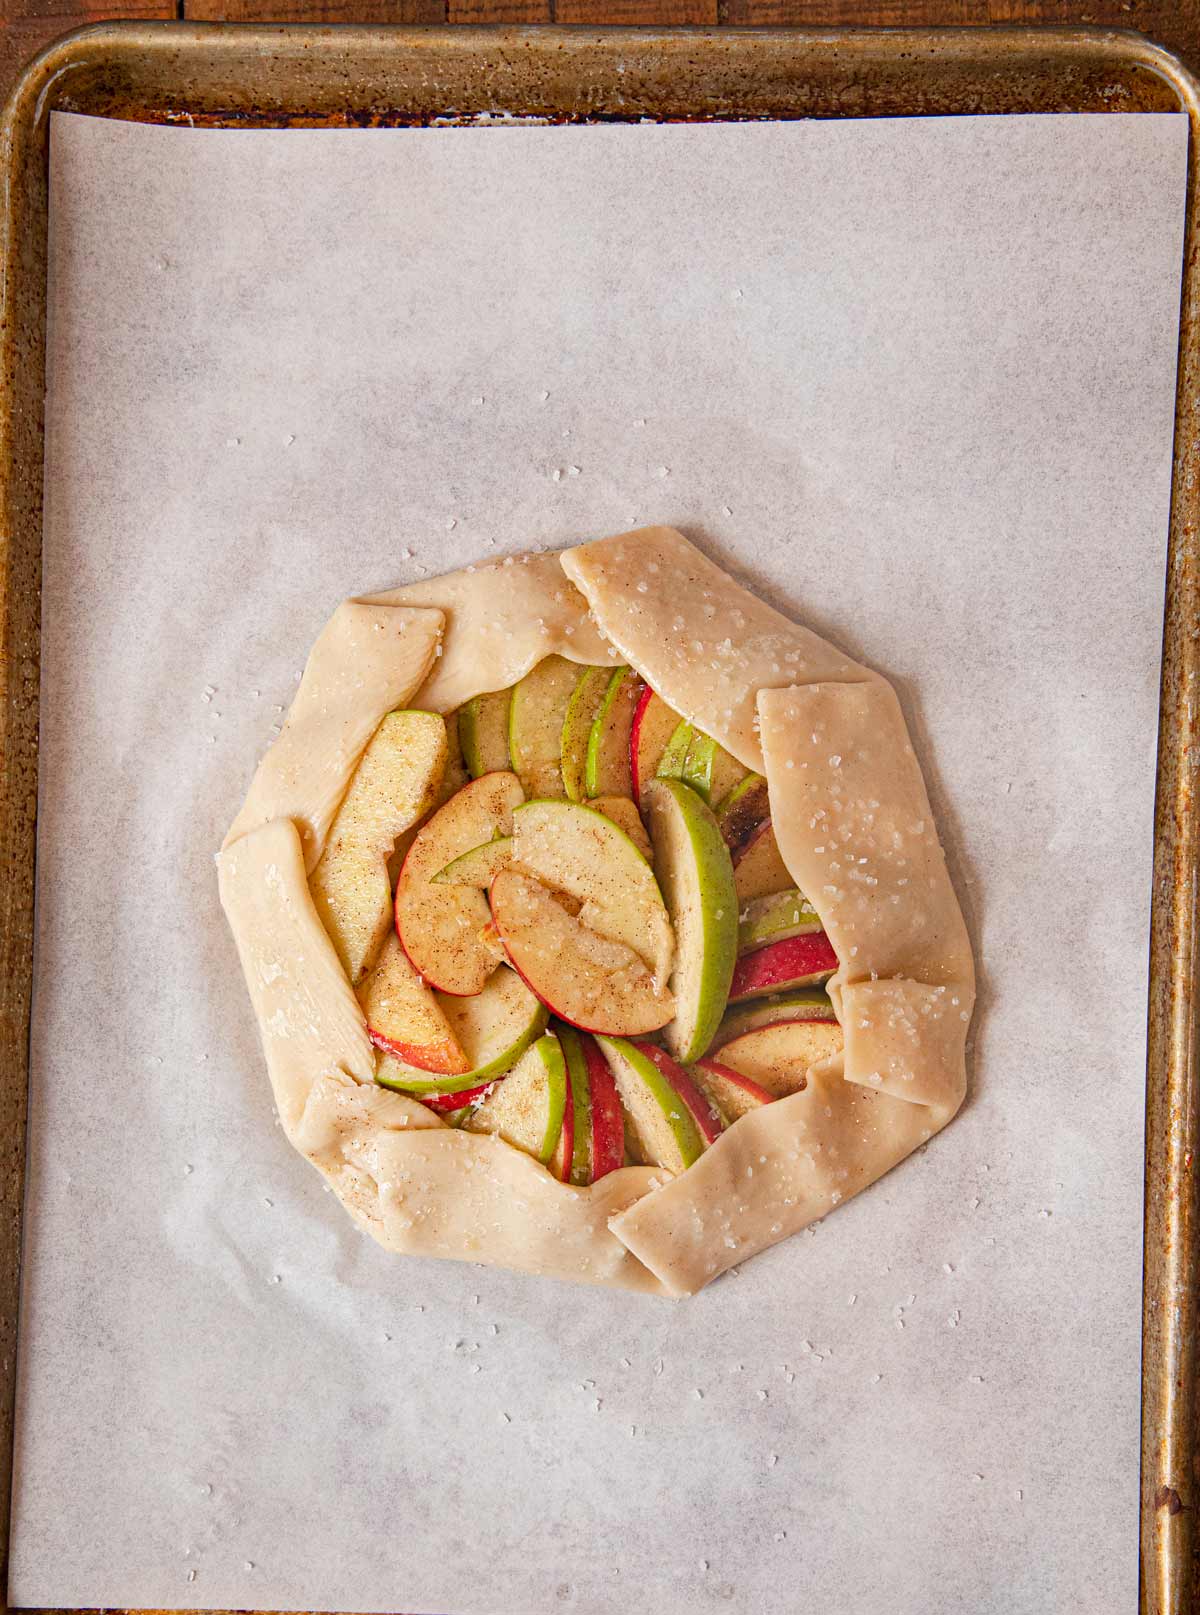 Rustic Apple Galette on baking dish before baking